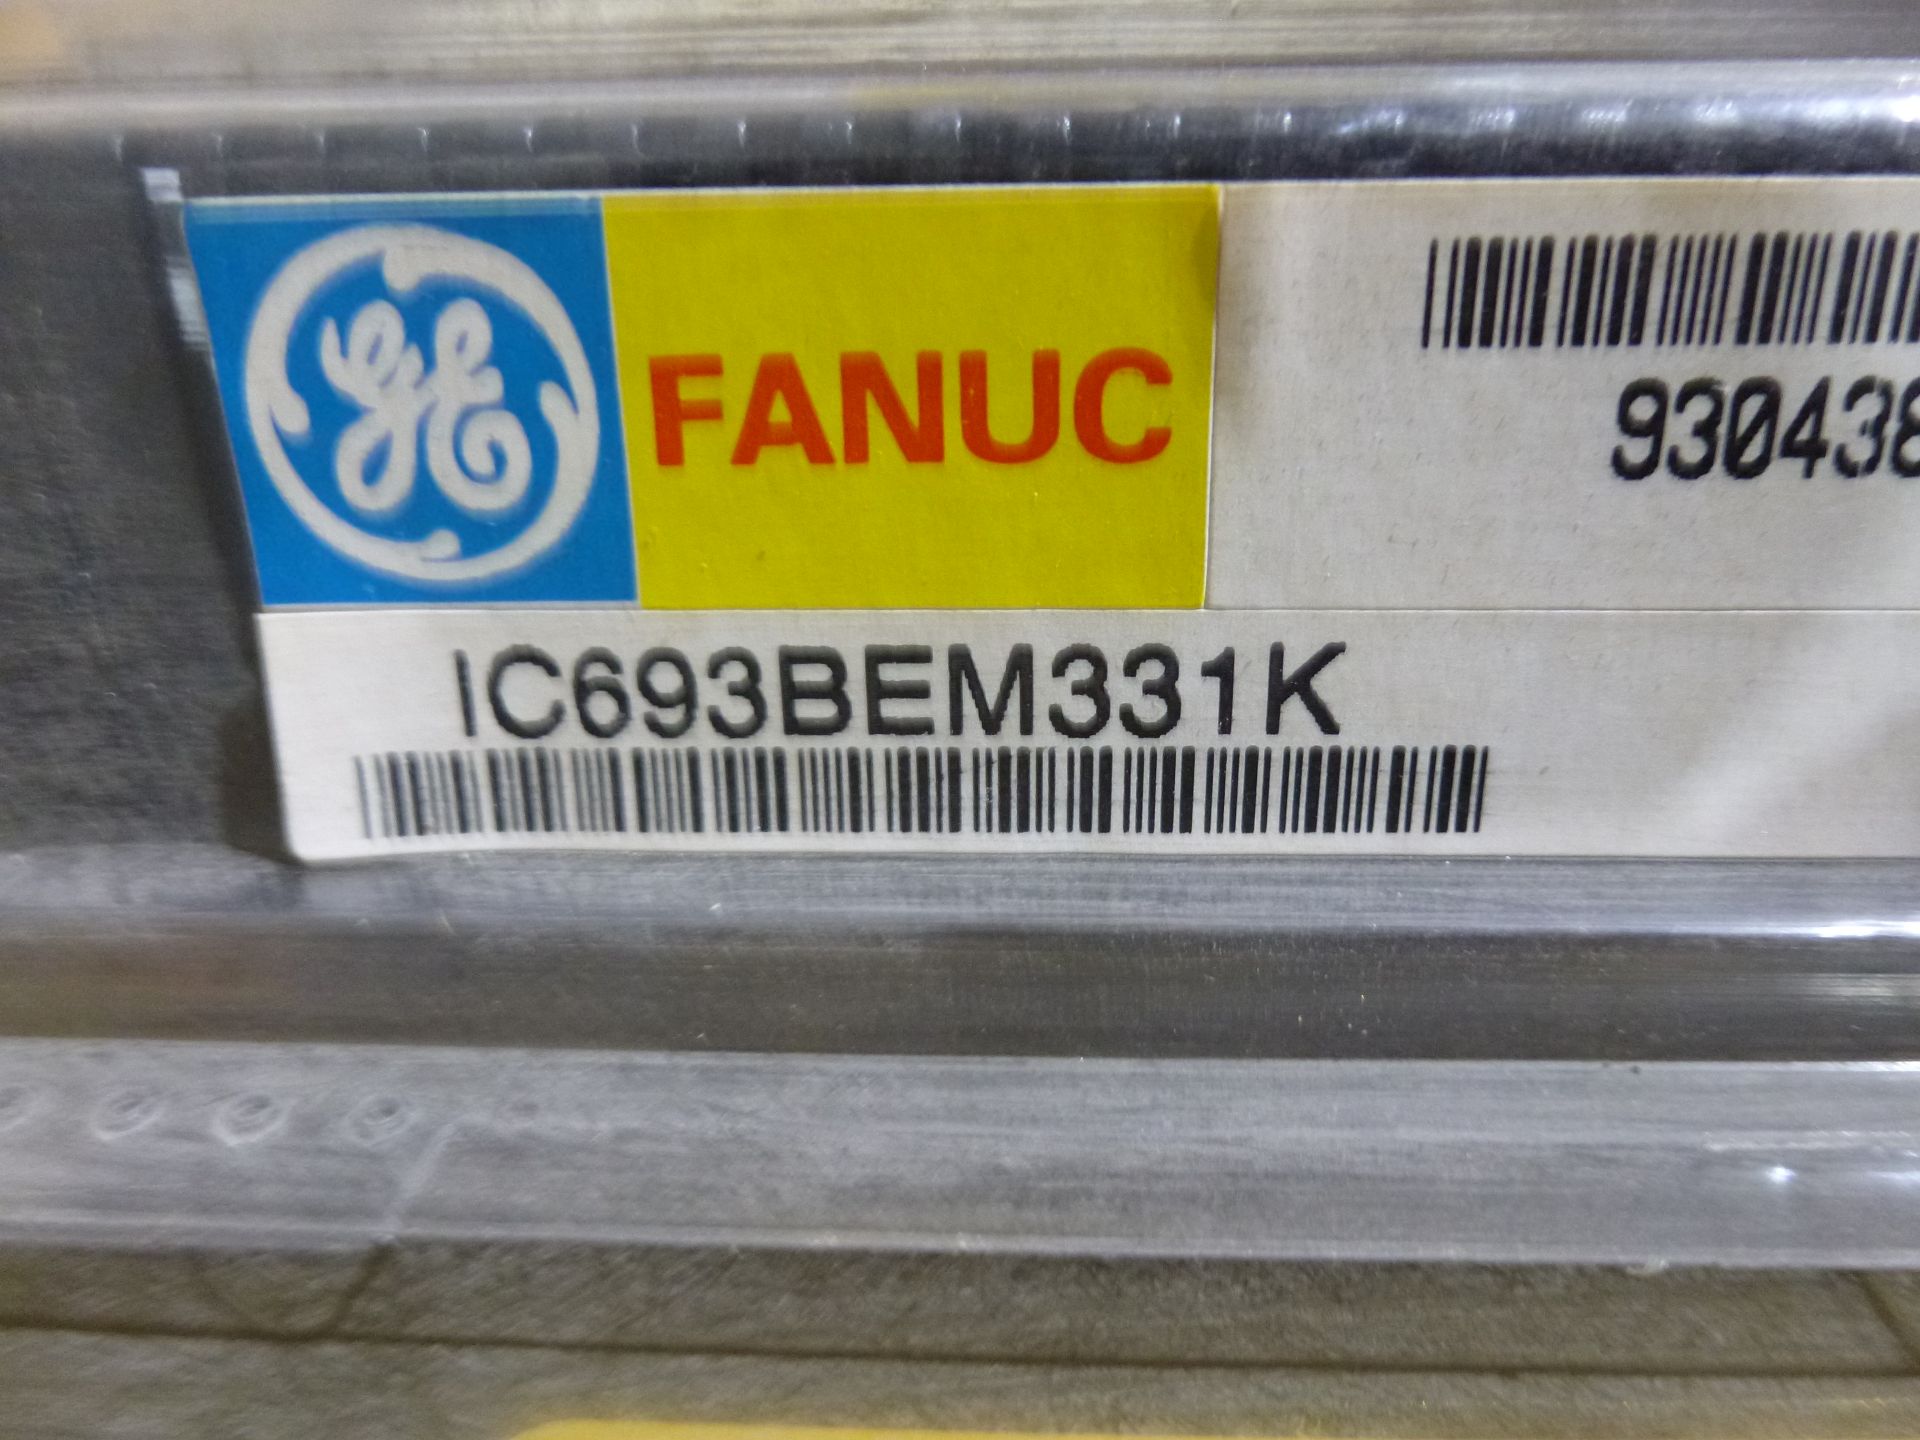 Qty 2 GE Fanuc IC693BEM331K, new in packages, packages show wear, as always with Brolyn LLC - Image 2 of 2